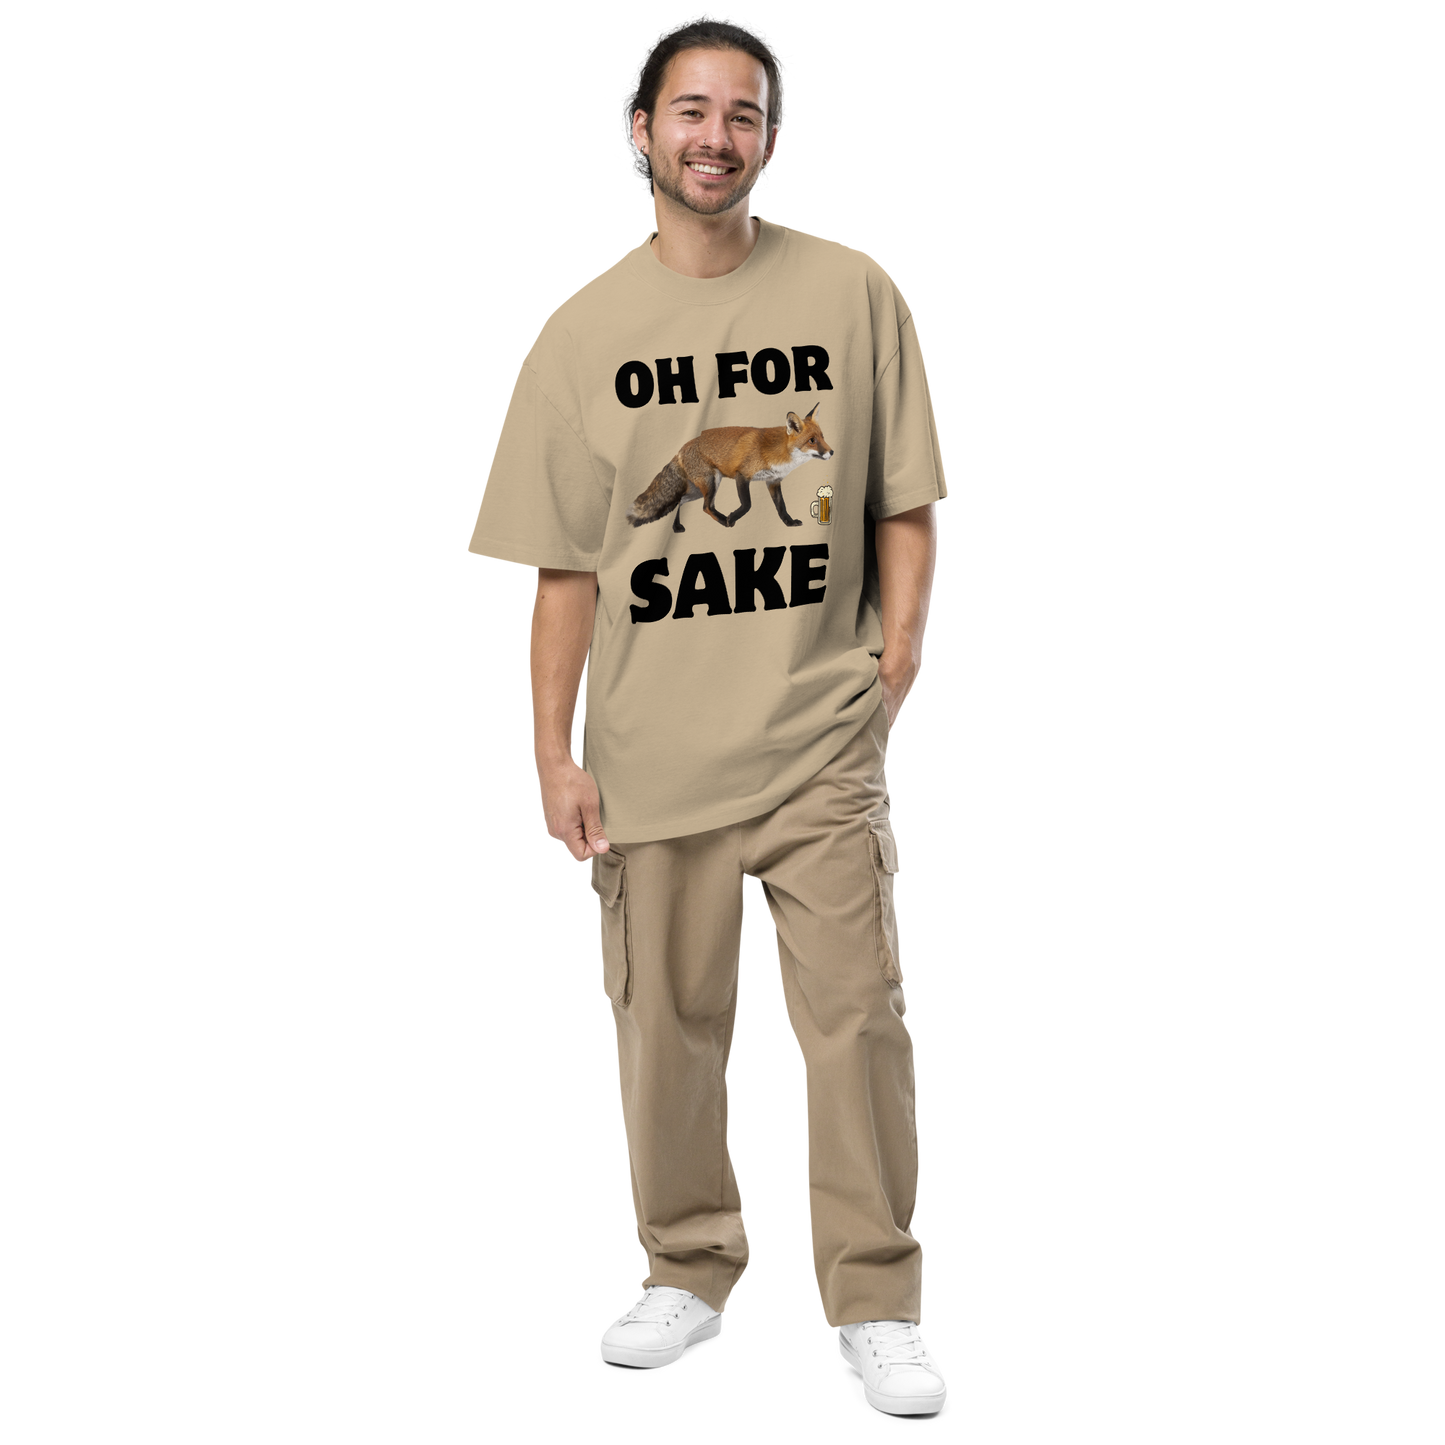 Man wearing a Faded Khaki Fox Oversized T-Shirt featuring a Oh For Fox Sake graphic on the chest - Funny Graphic Fox Oversized Tees - Boozy Fox